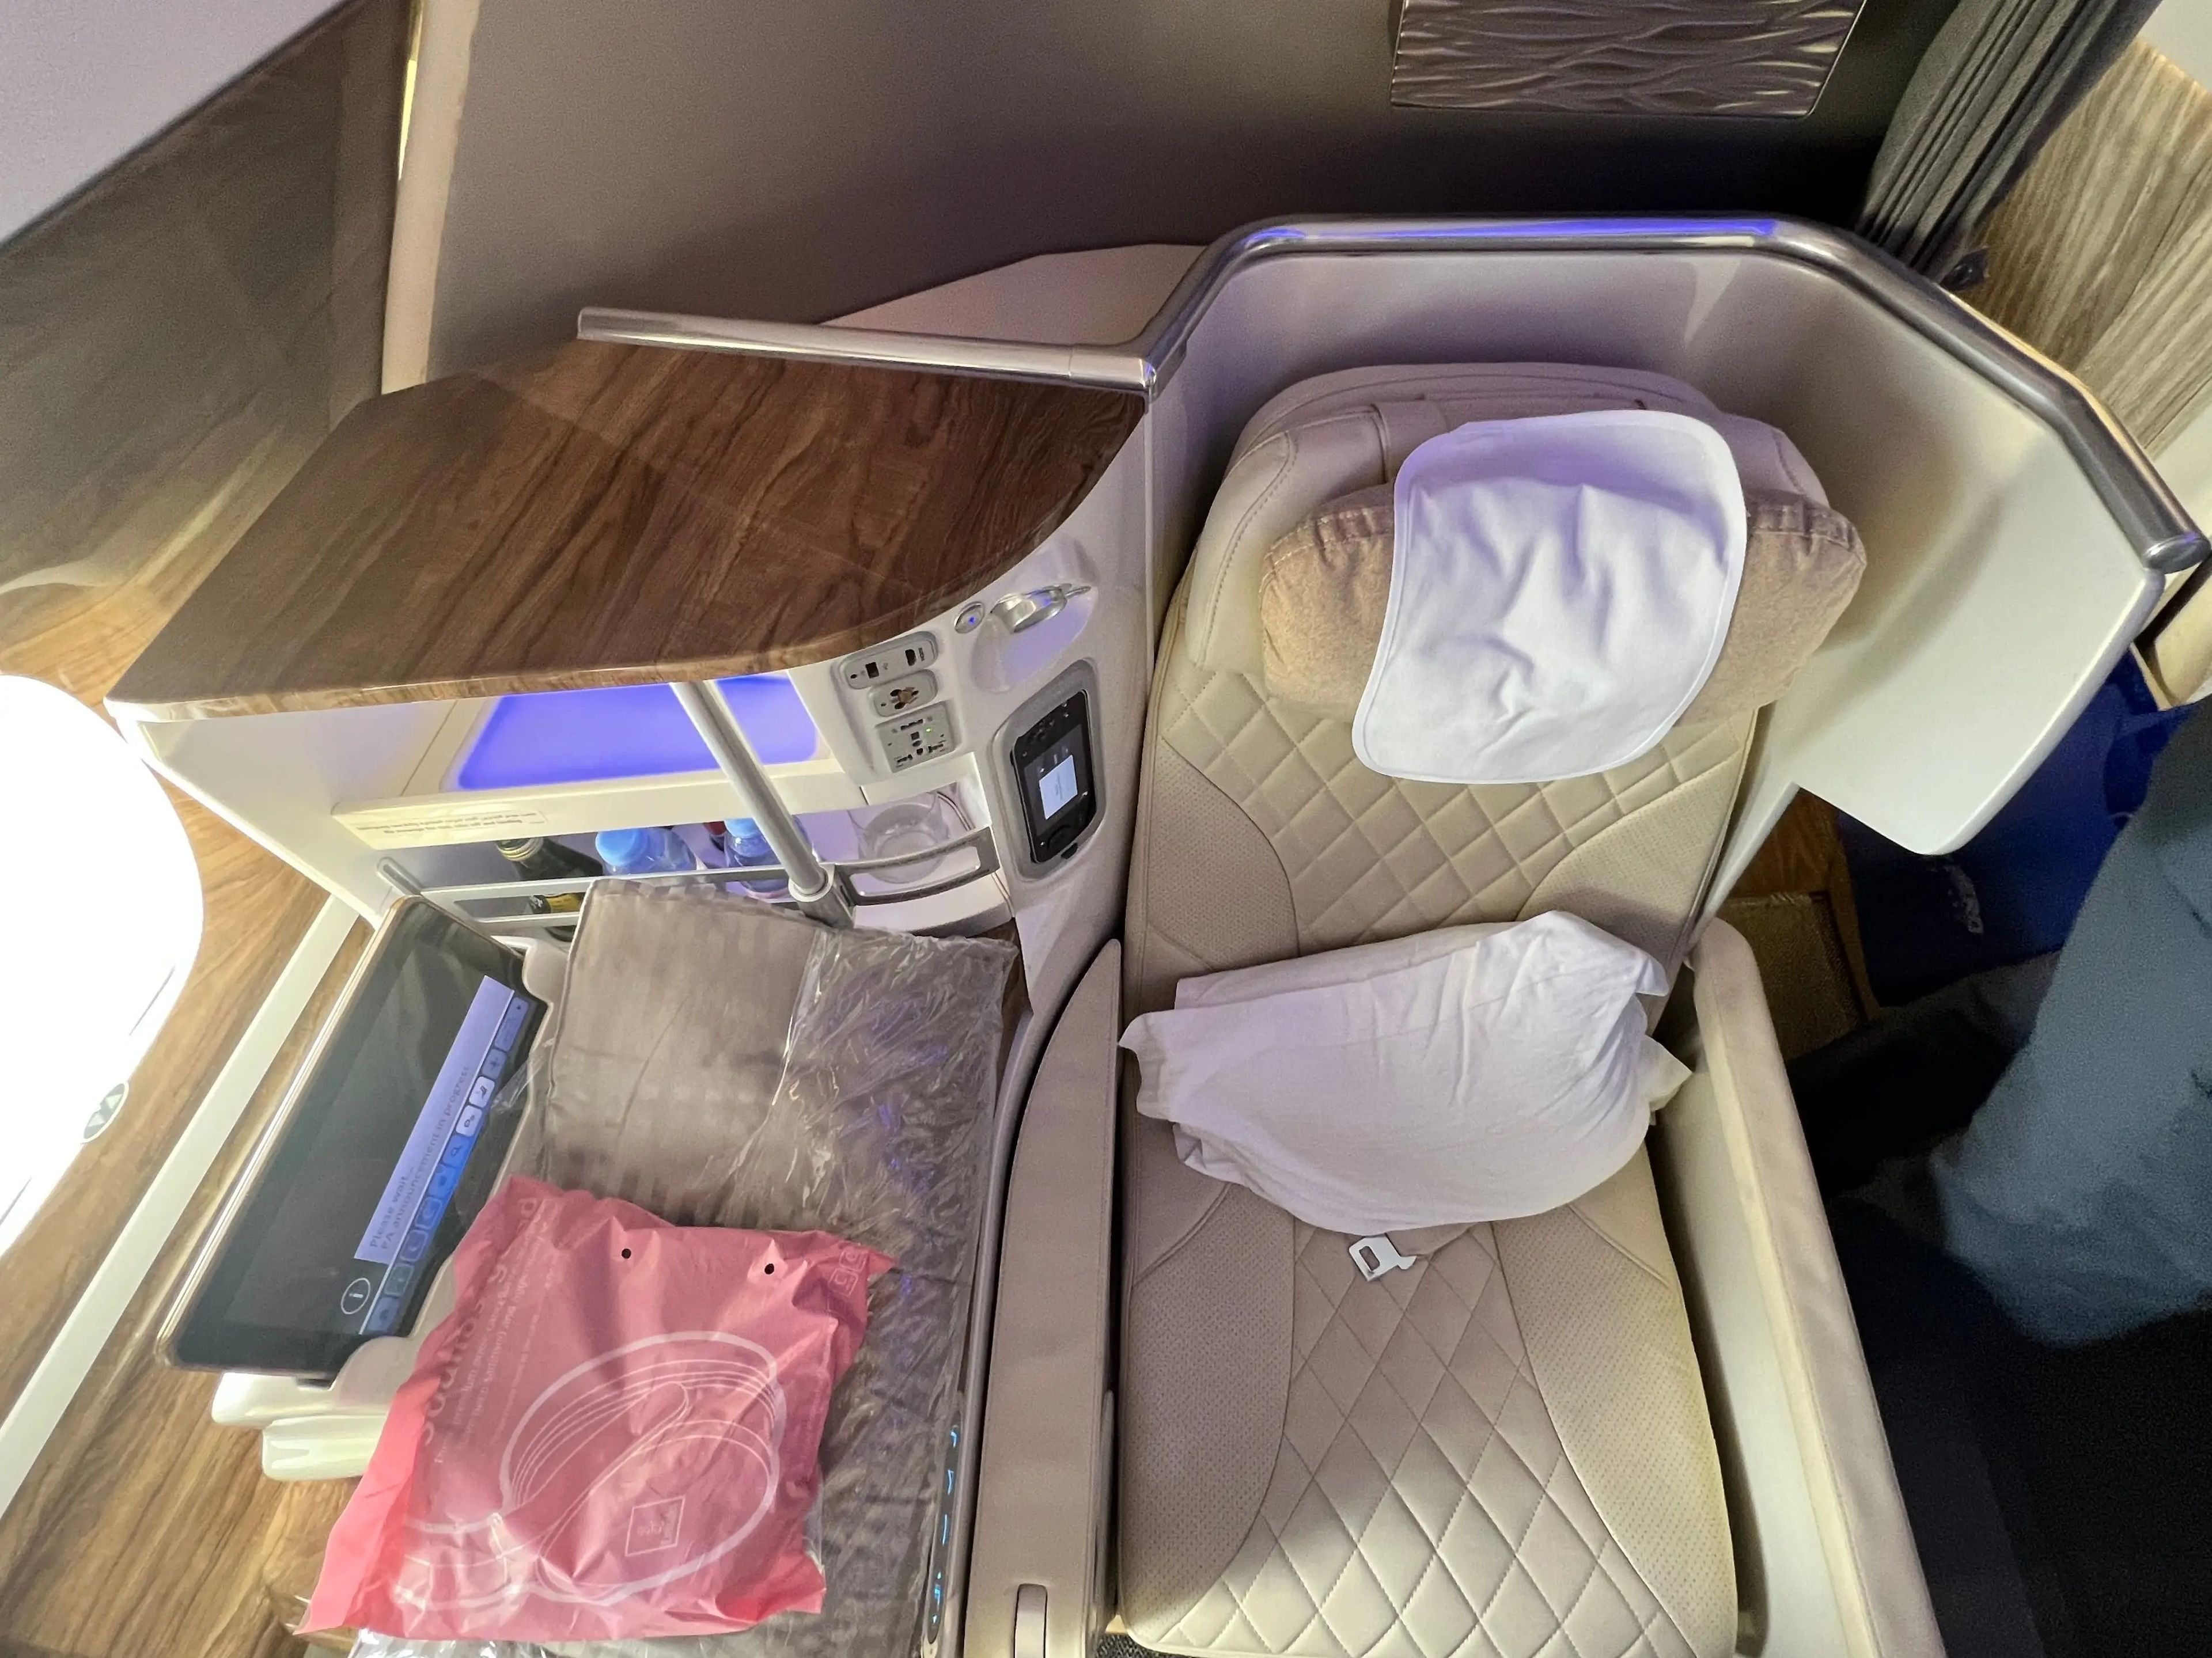 A business class seat in beige leather with white cushion, amenities and drinks holder on the side, onboard Emirates A380